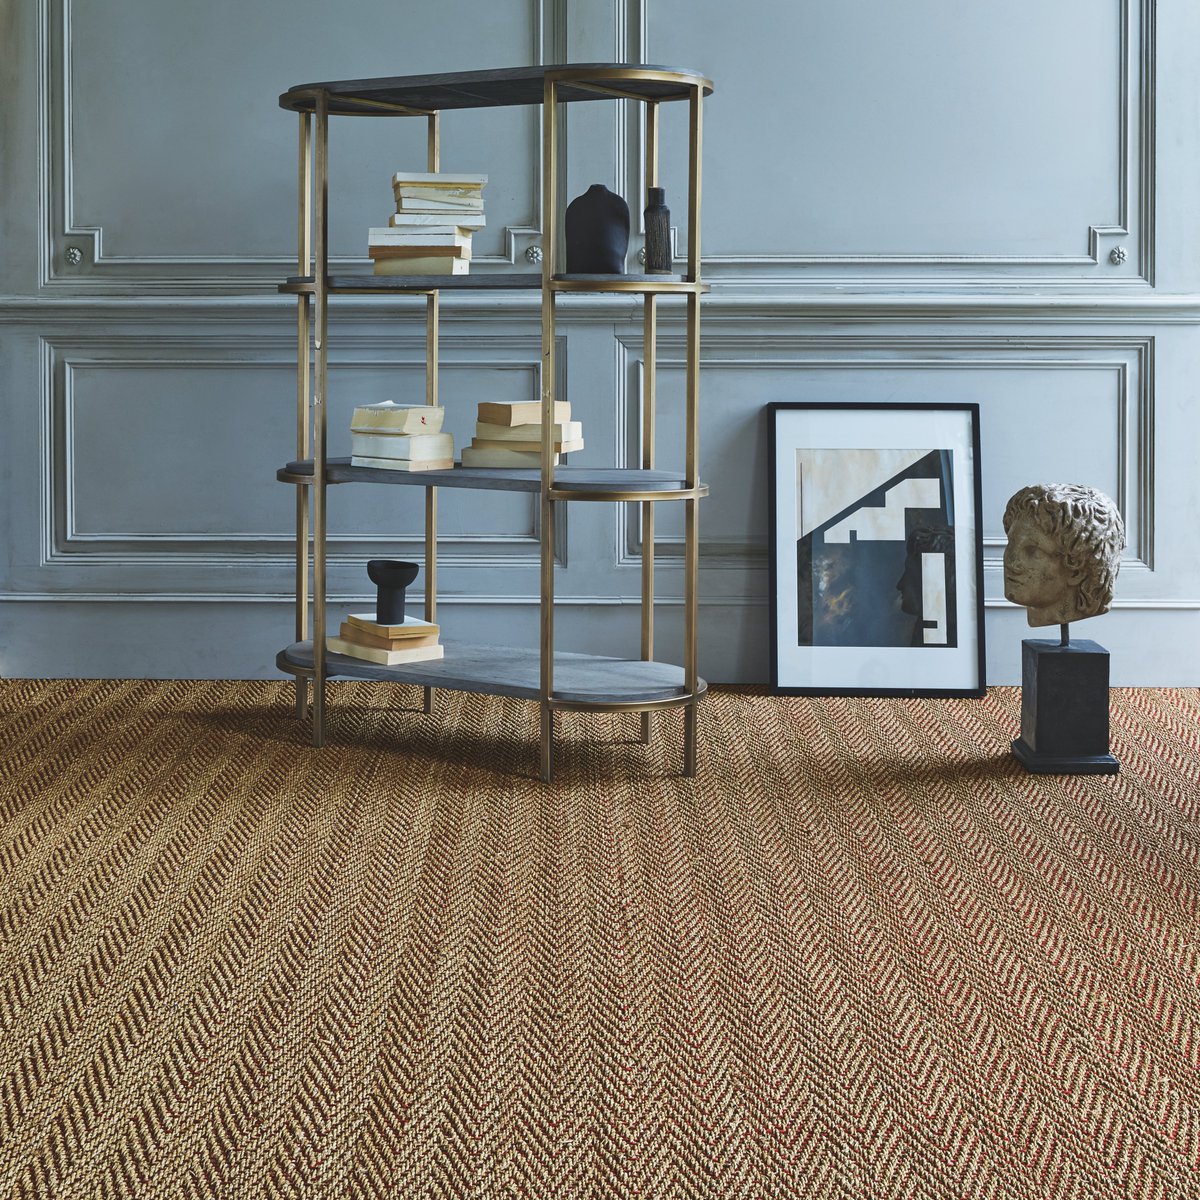 @crucialtrading's Natural Fine #Seagrass #Herringbone is a perfect combination of natural #sisal texture and a contemporary herringbone pattern.

📍6-8 Richmond Hill, Richmond TW10 6QX
richmond@wovenandwoods.com
wovenandwoods.com
020 8287 5900